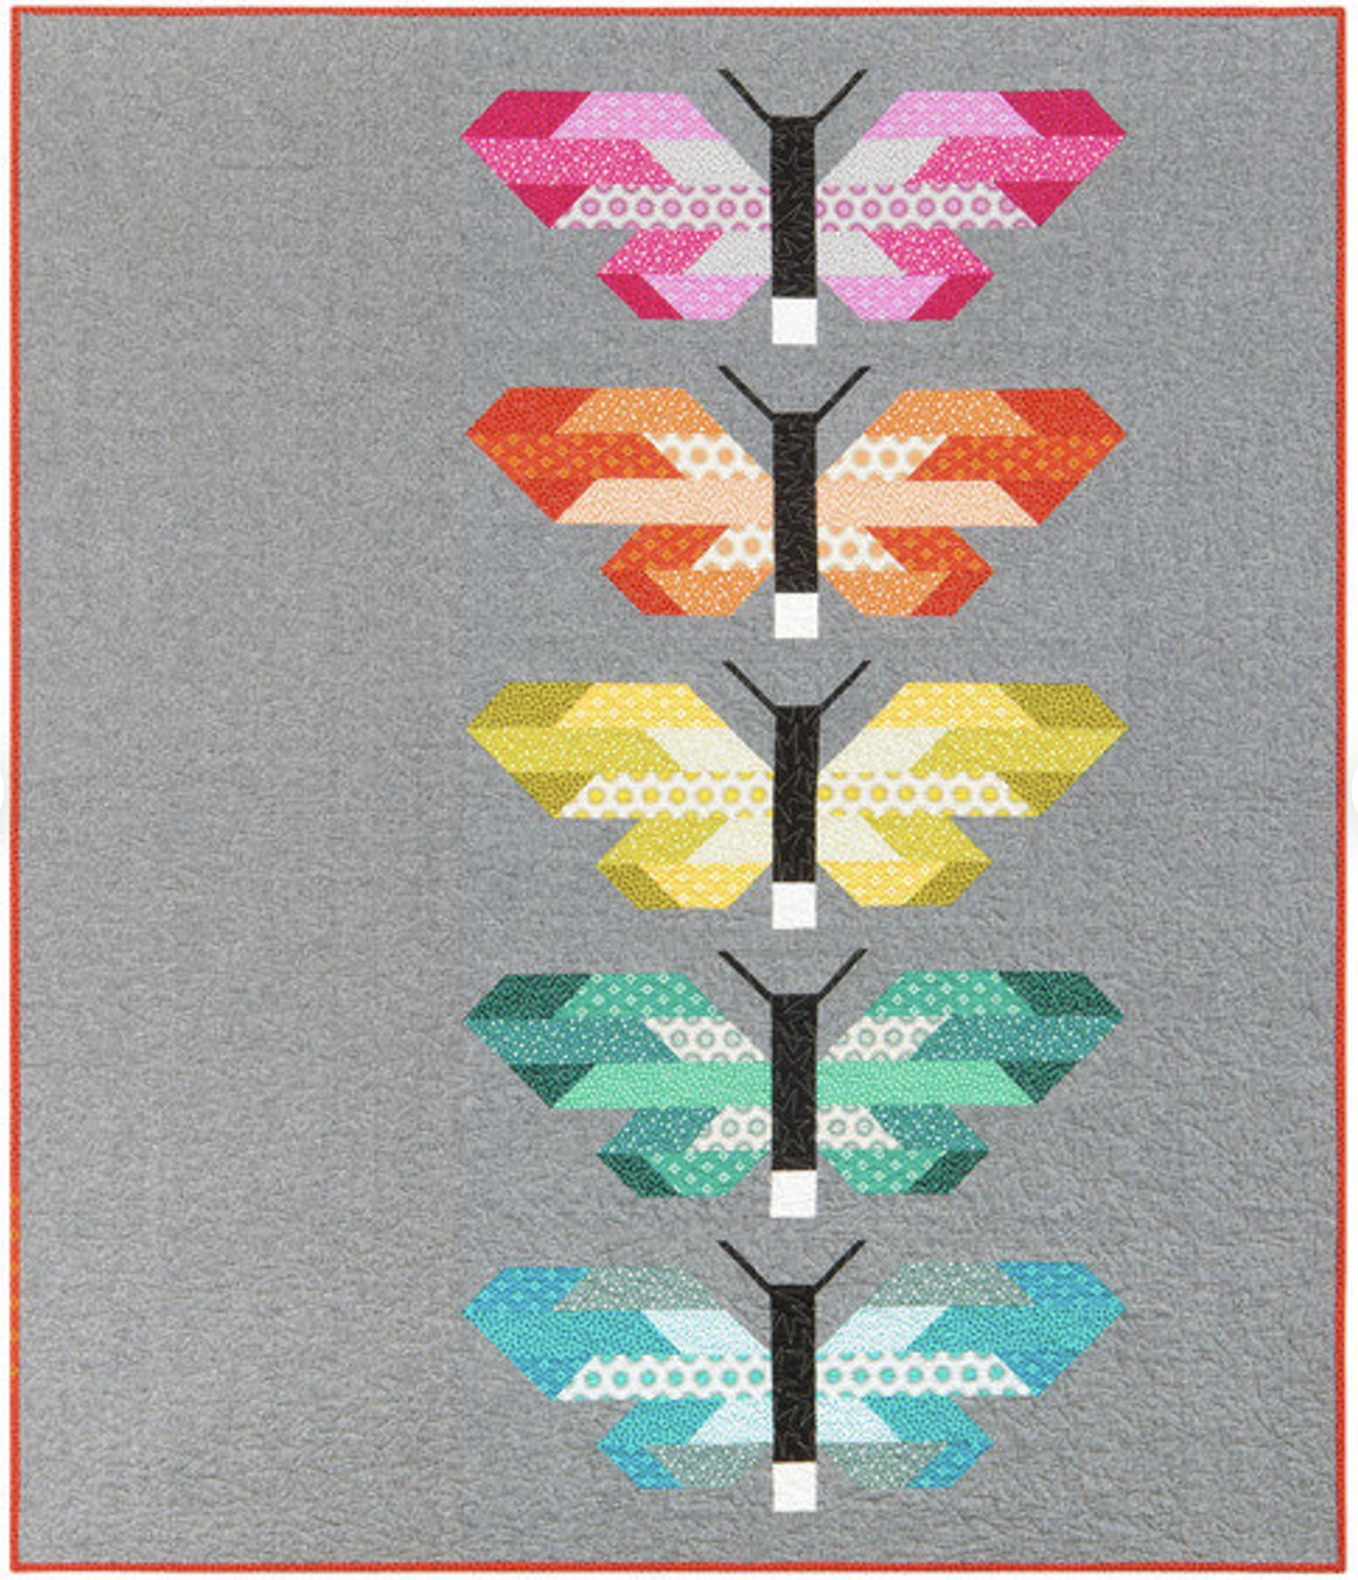 Minimal butterfly quilt kit